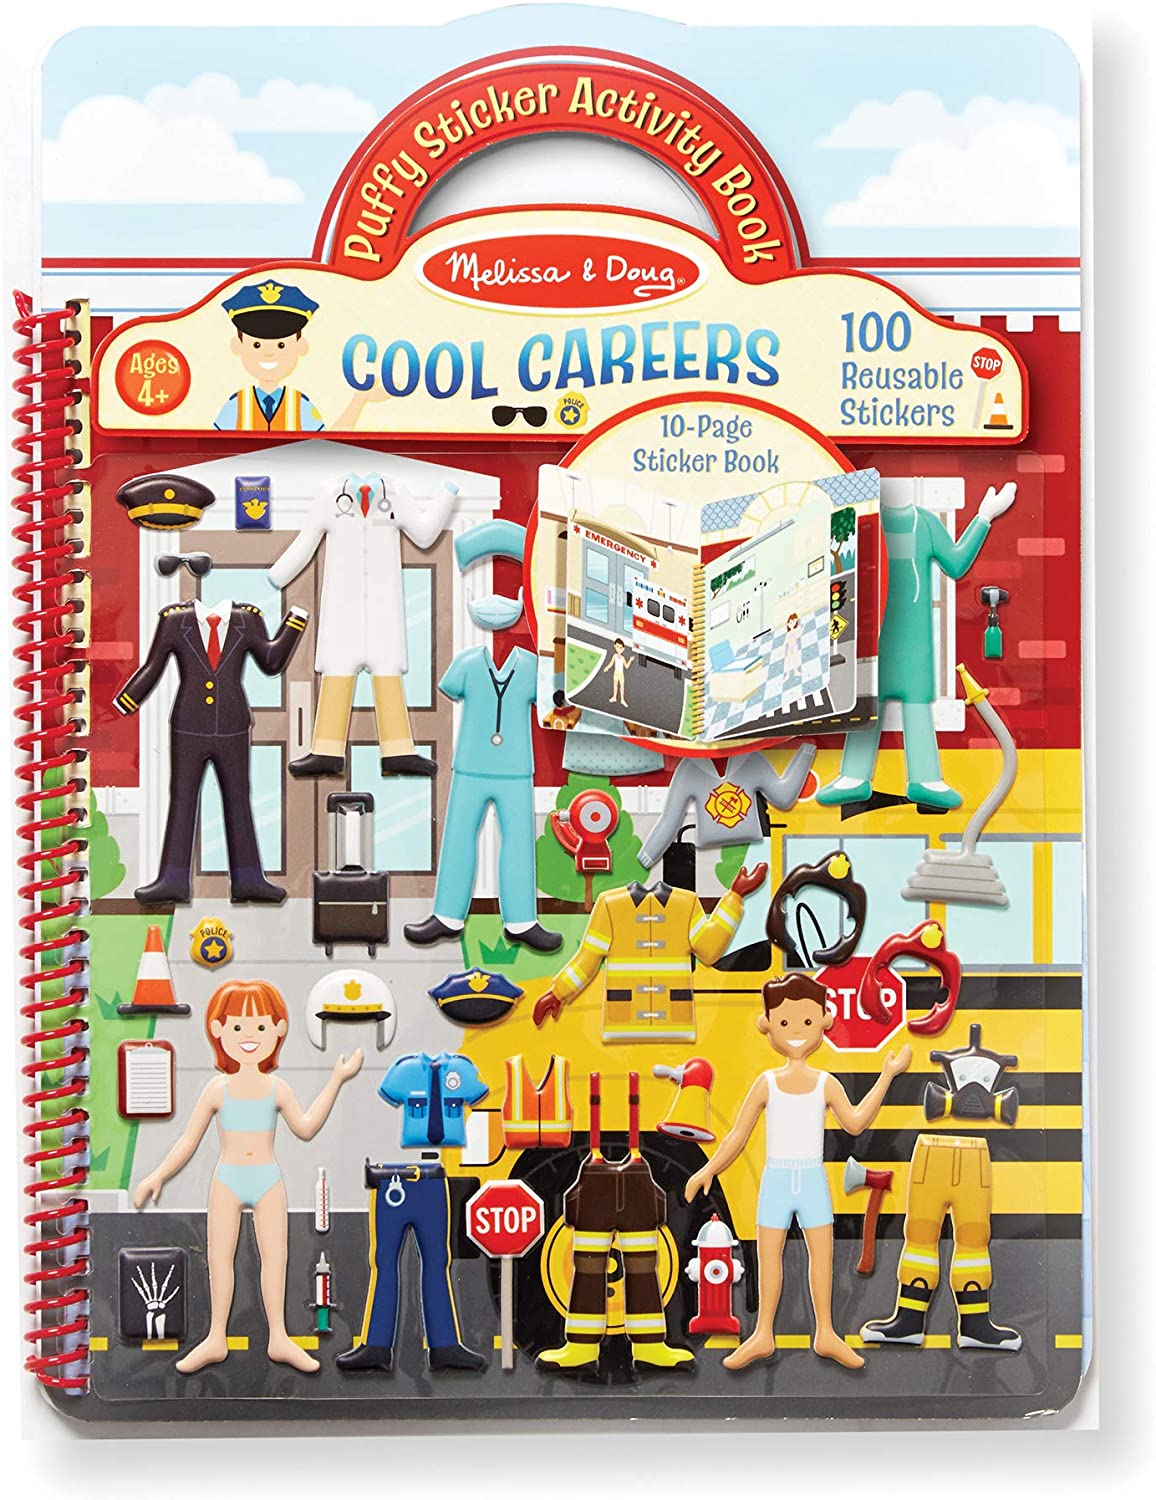 Puffy Sticker Book ,sticker Play Set: Cool Careers Activity Book - 101 Reusable Stickers